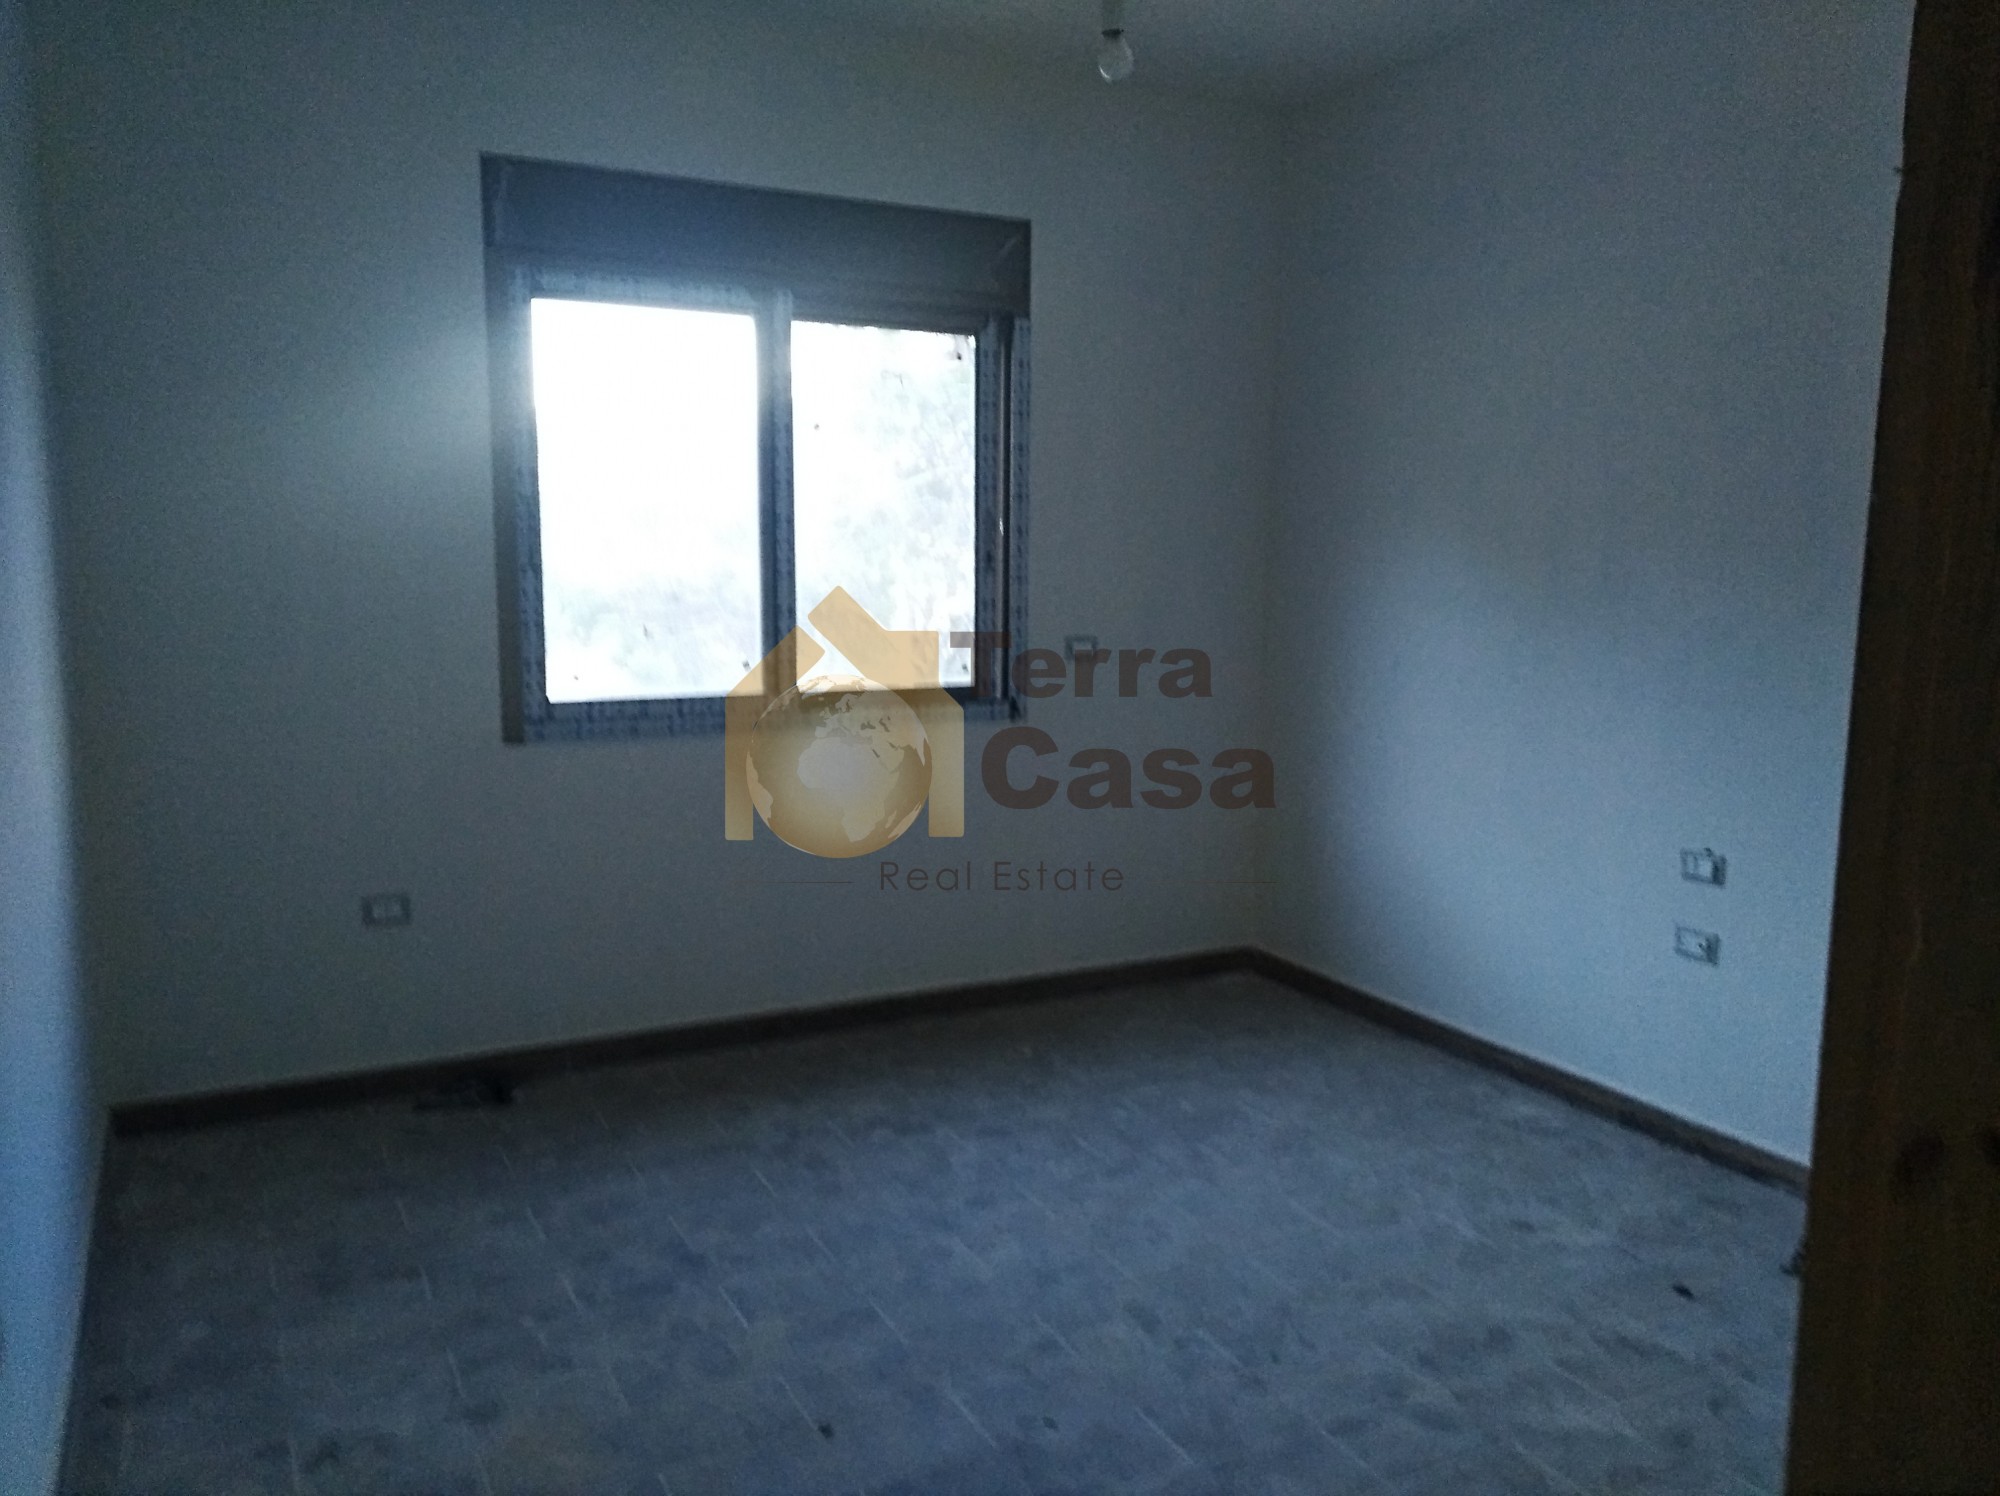 Apartment for sale in zahle Ain el dawq brand new luxurious apartment with city view.